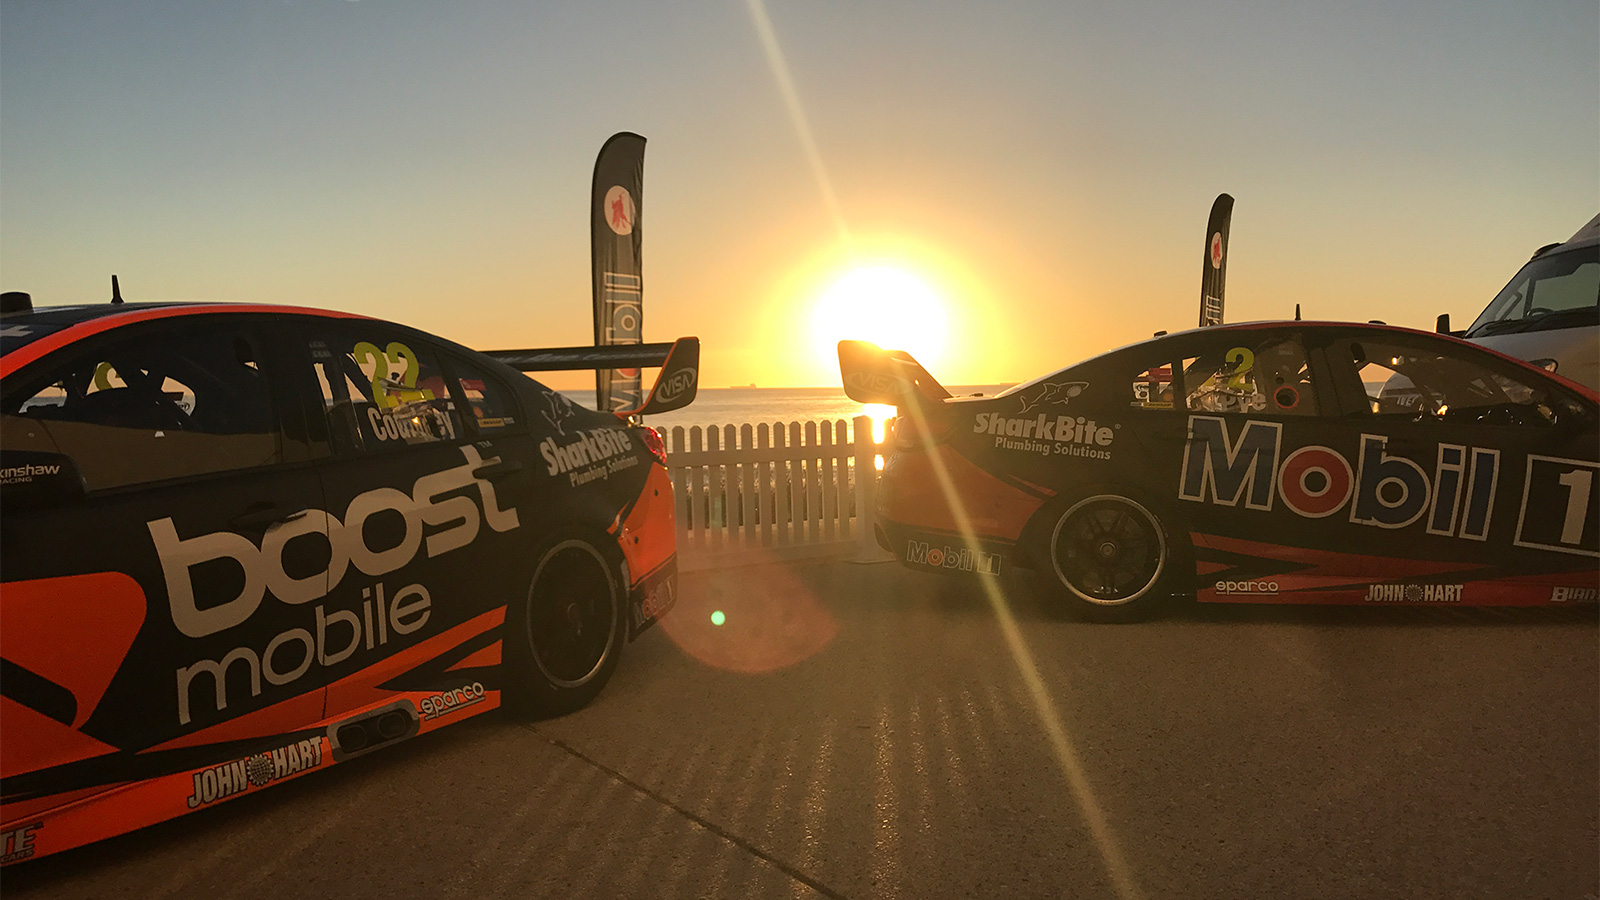 The cars looked amazing with the setting Perth sun.